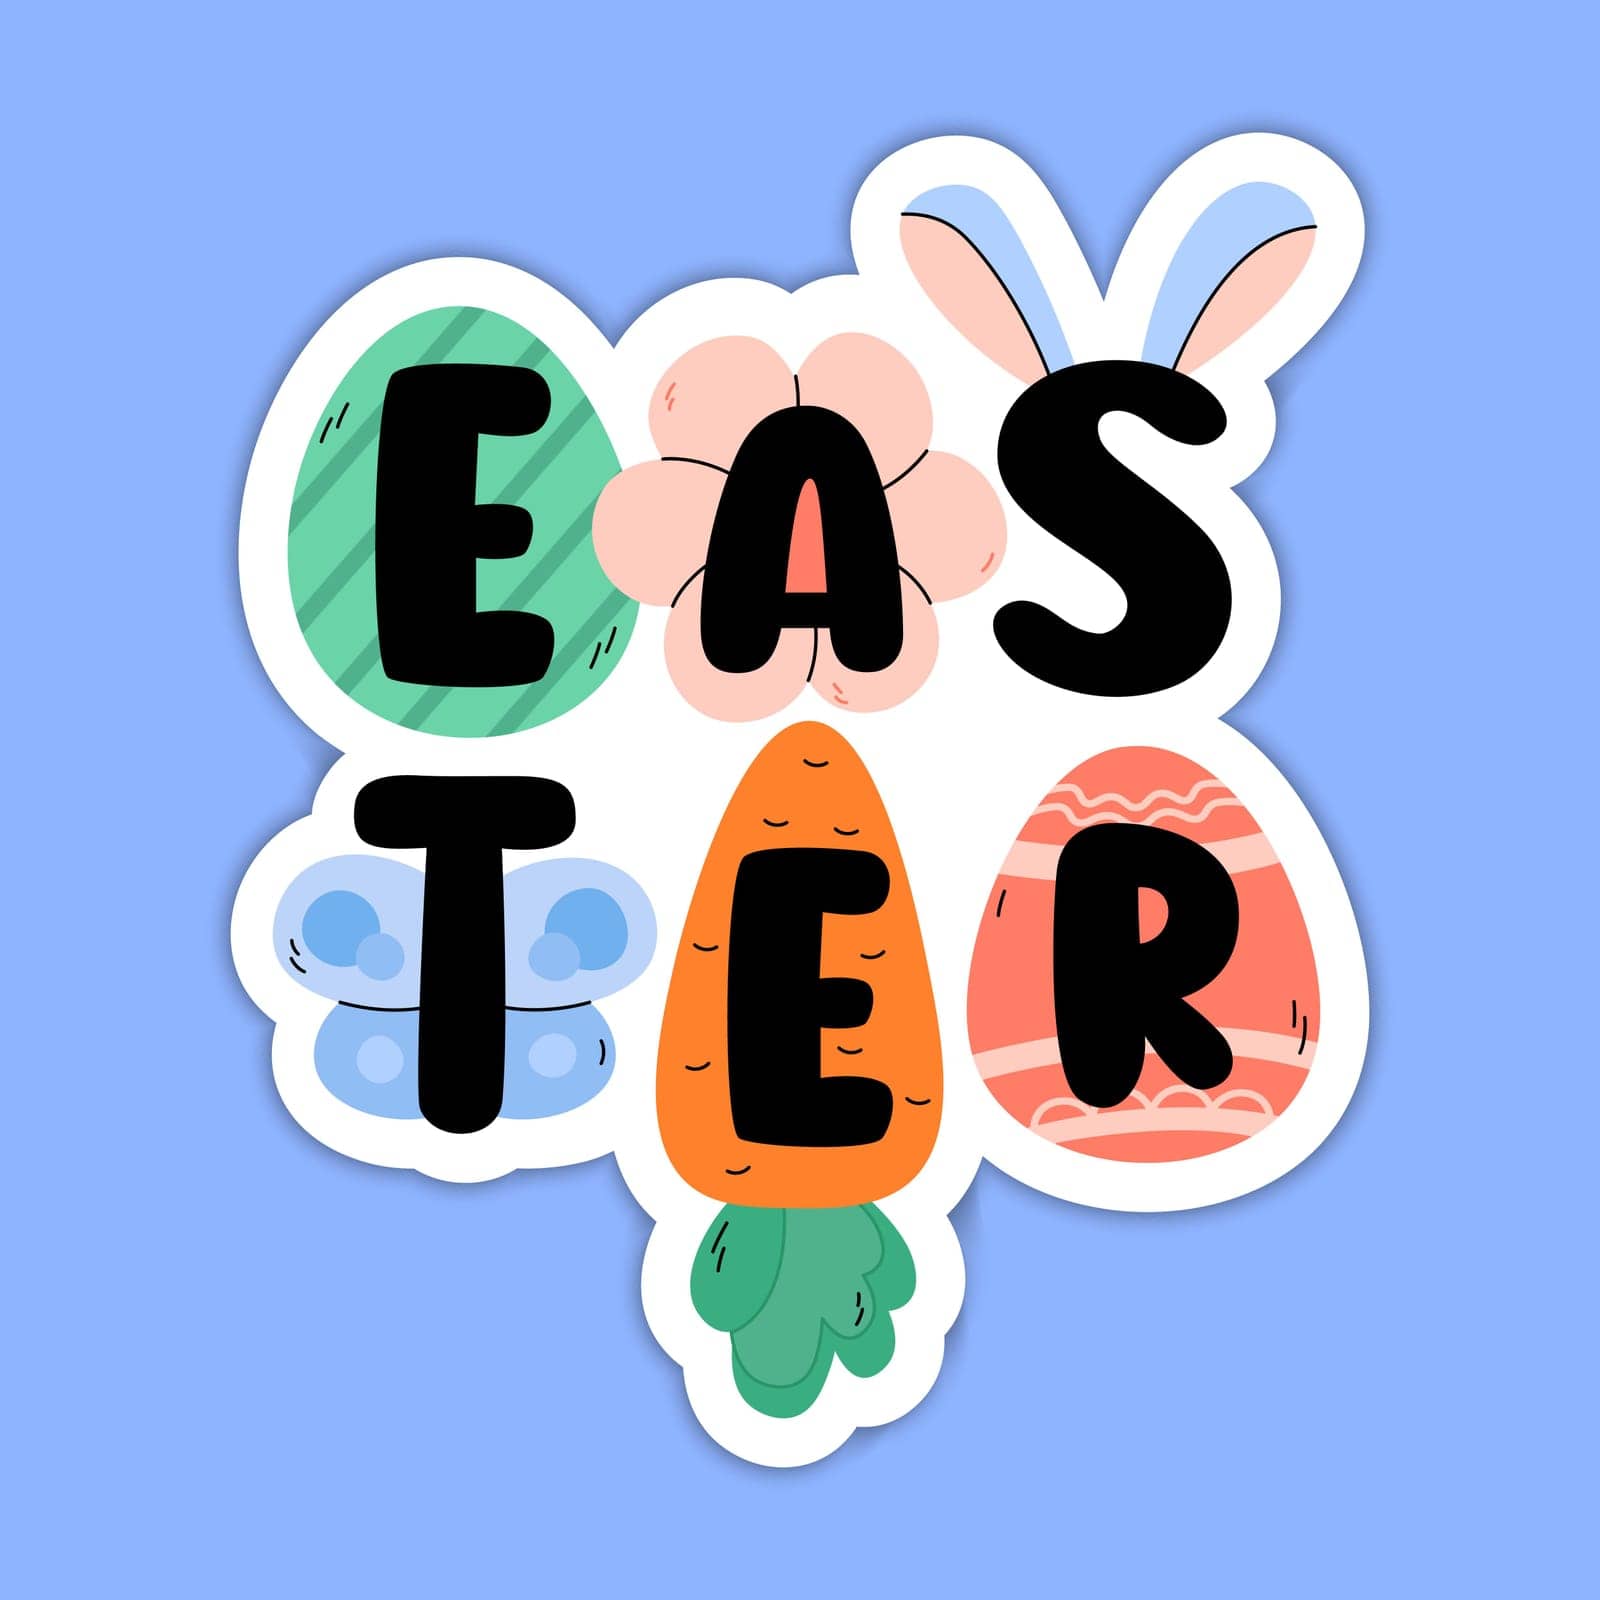 Easter cute cartoon vector illustration. Easter print colorful for greeting cards, posters, web banners, stickers. Doodle elements eggs, flower, bunny, carrot by AnnaViolet